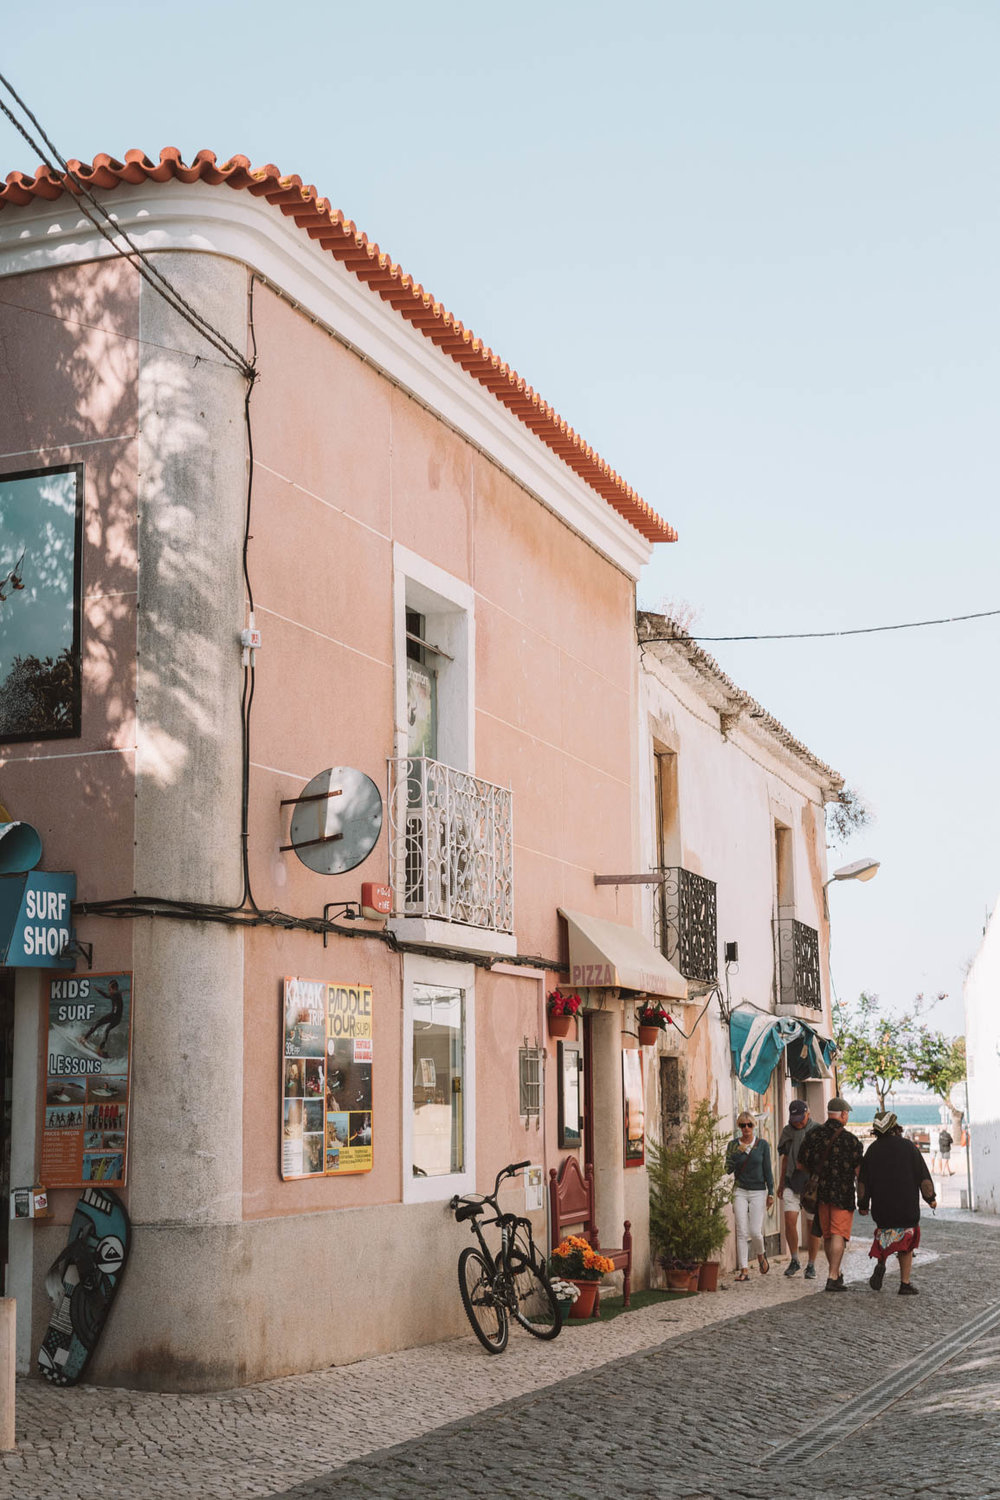 Lagos Old Town - Fun things to do in Lagos Algarve Portugal #Portugal #Europe